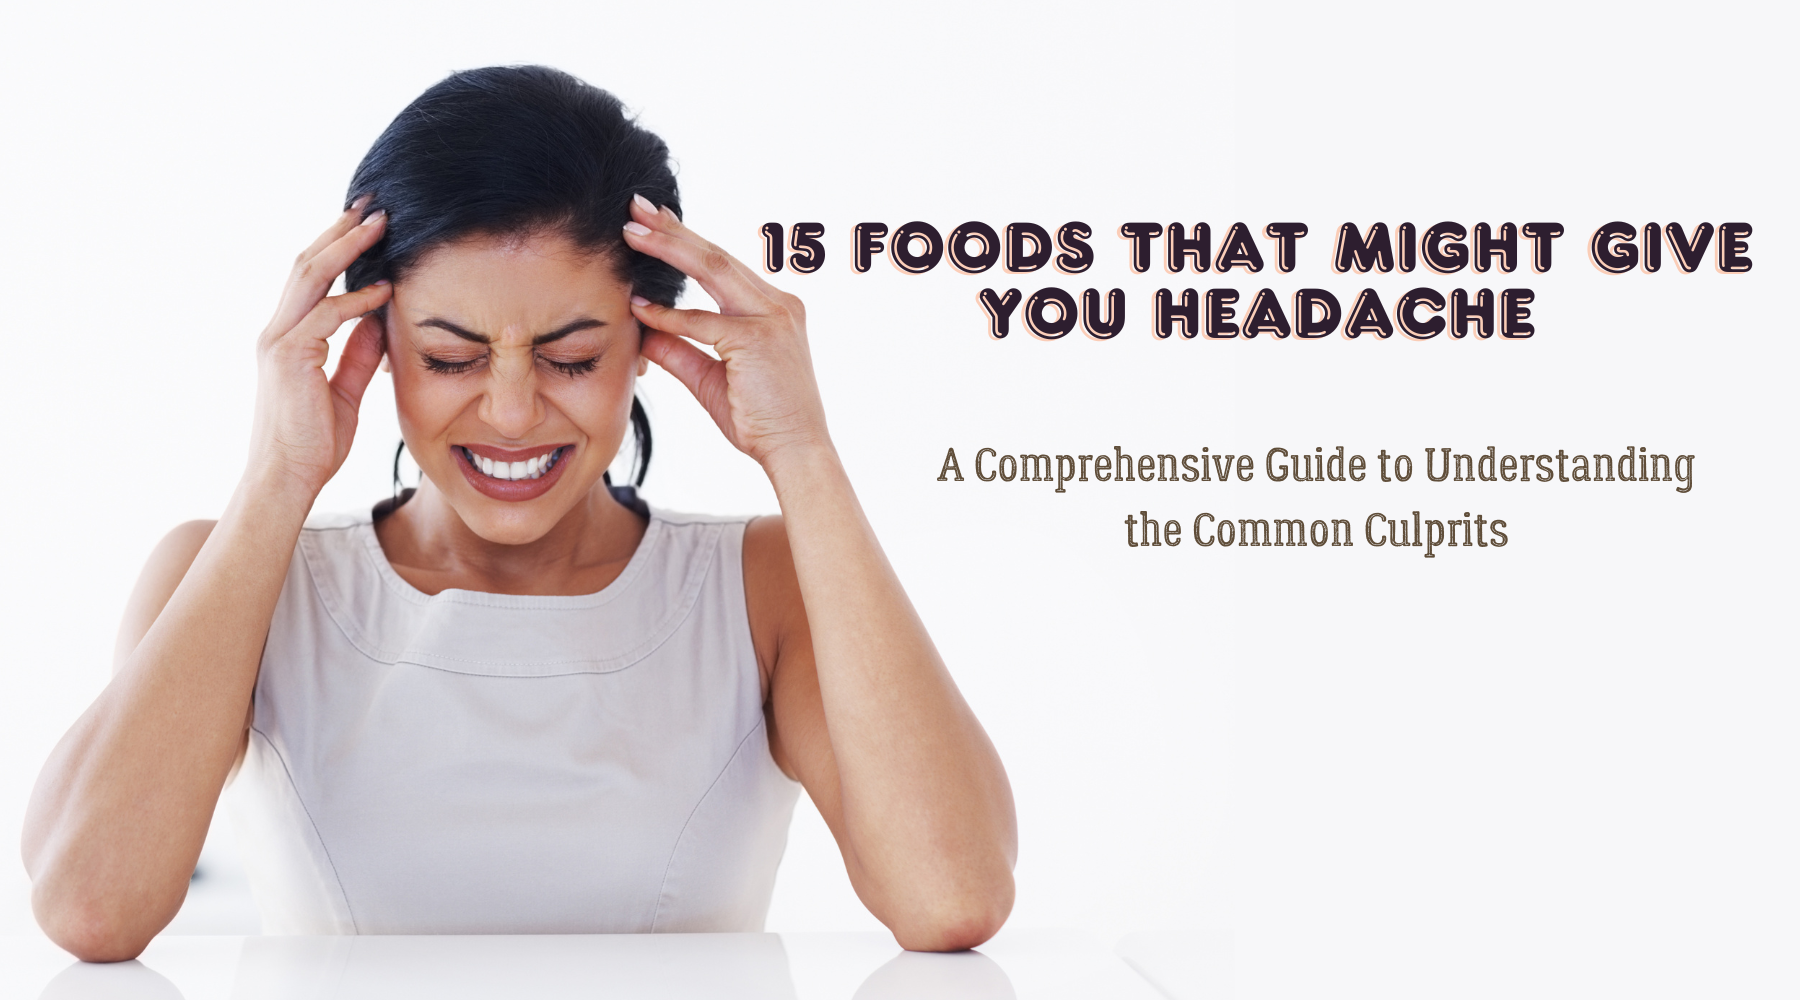 15 Foods That Might Give You Headache - A Comprehensive Guide to Understanding the Common Culprits